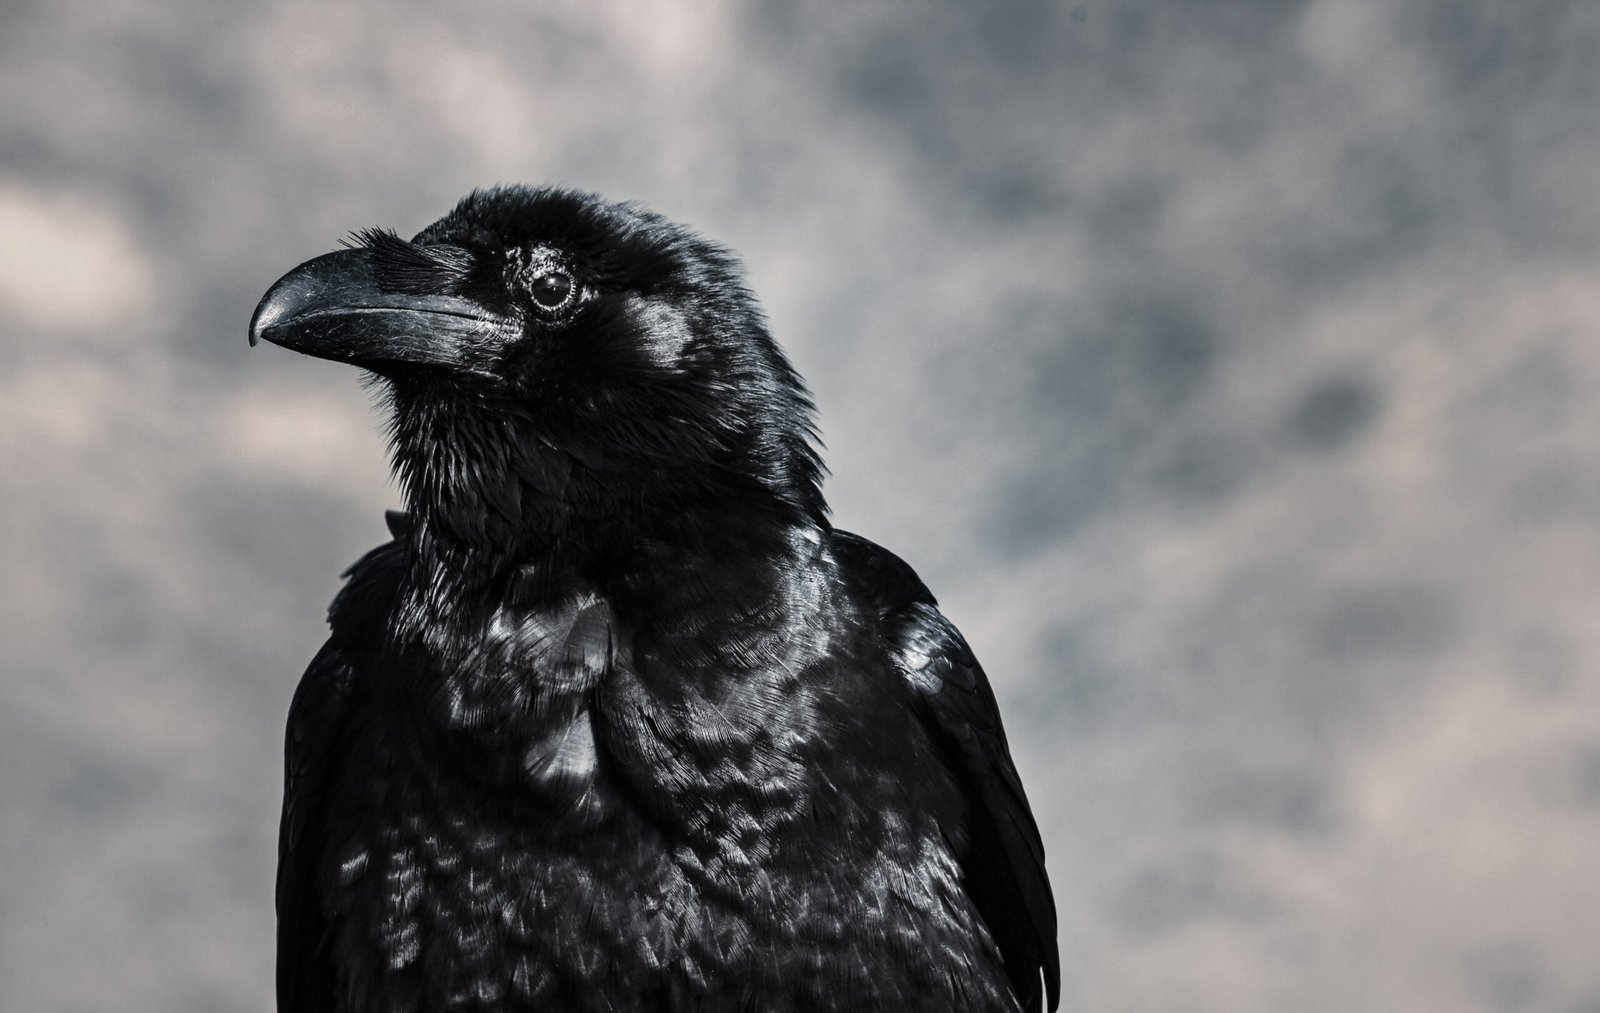 A raven looking into the distance